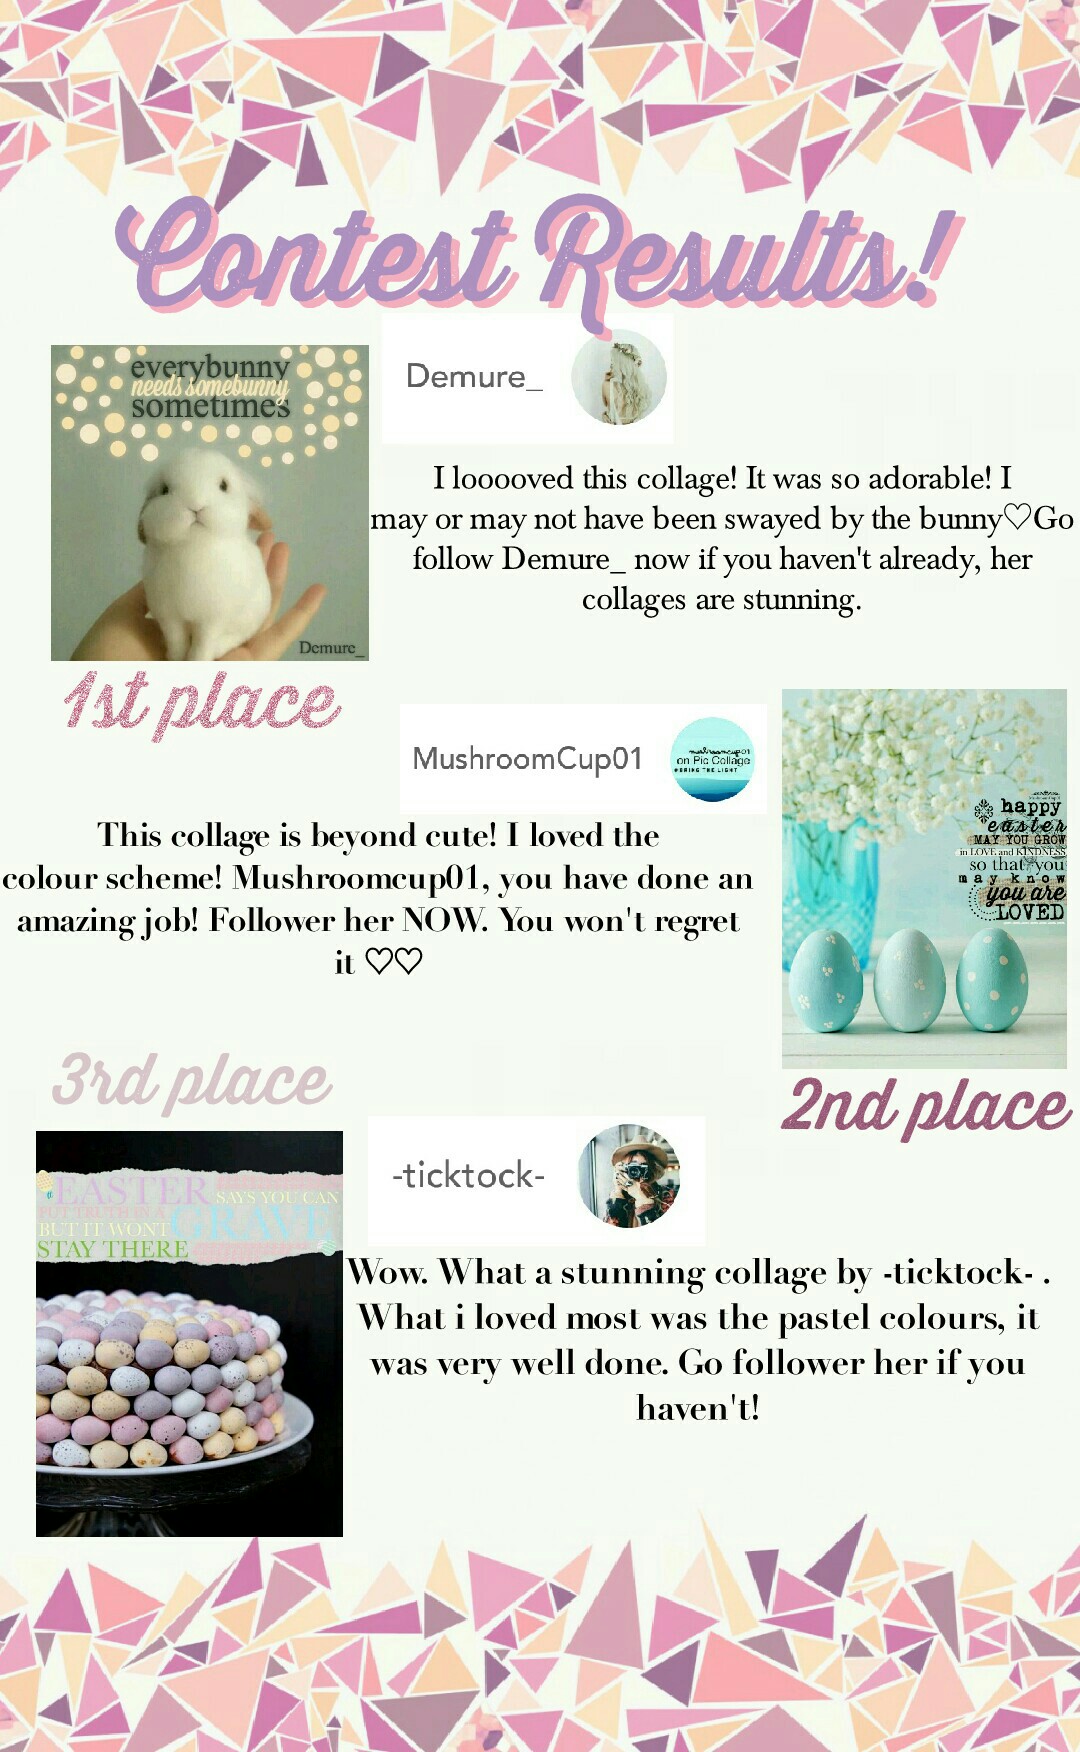 Contest results!
Congrats to our 3 winners! And a big thanks to everyone who entered. Your support means the world to me and I love you to peices. Great work! 